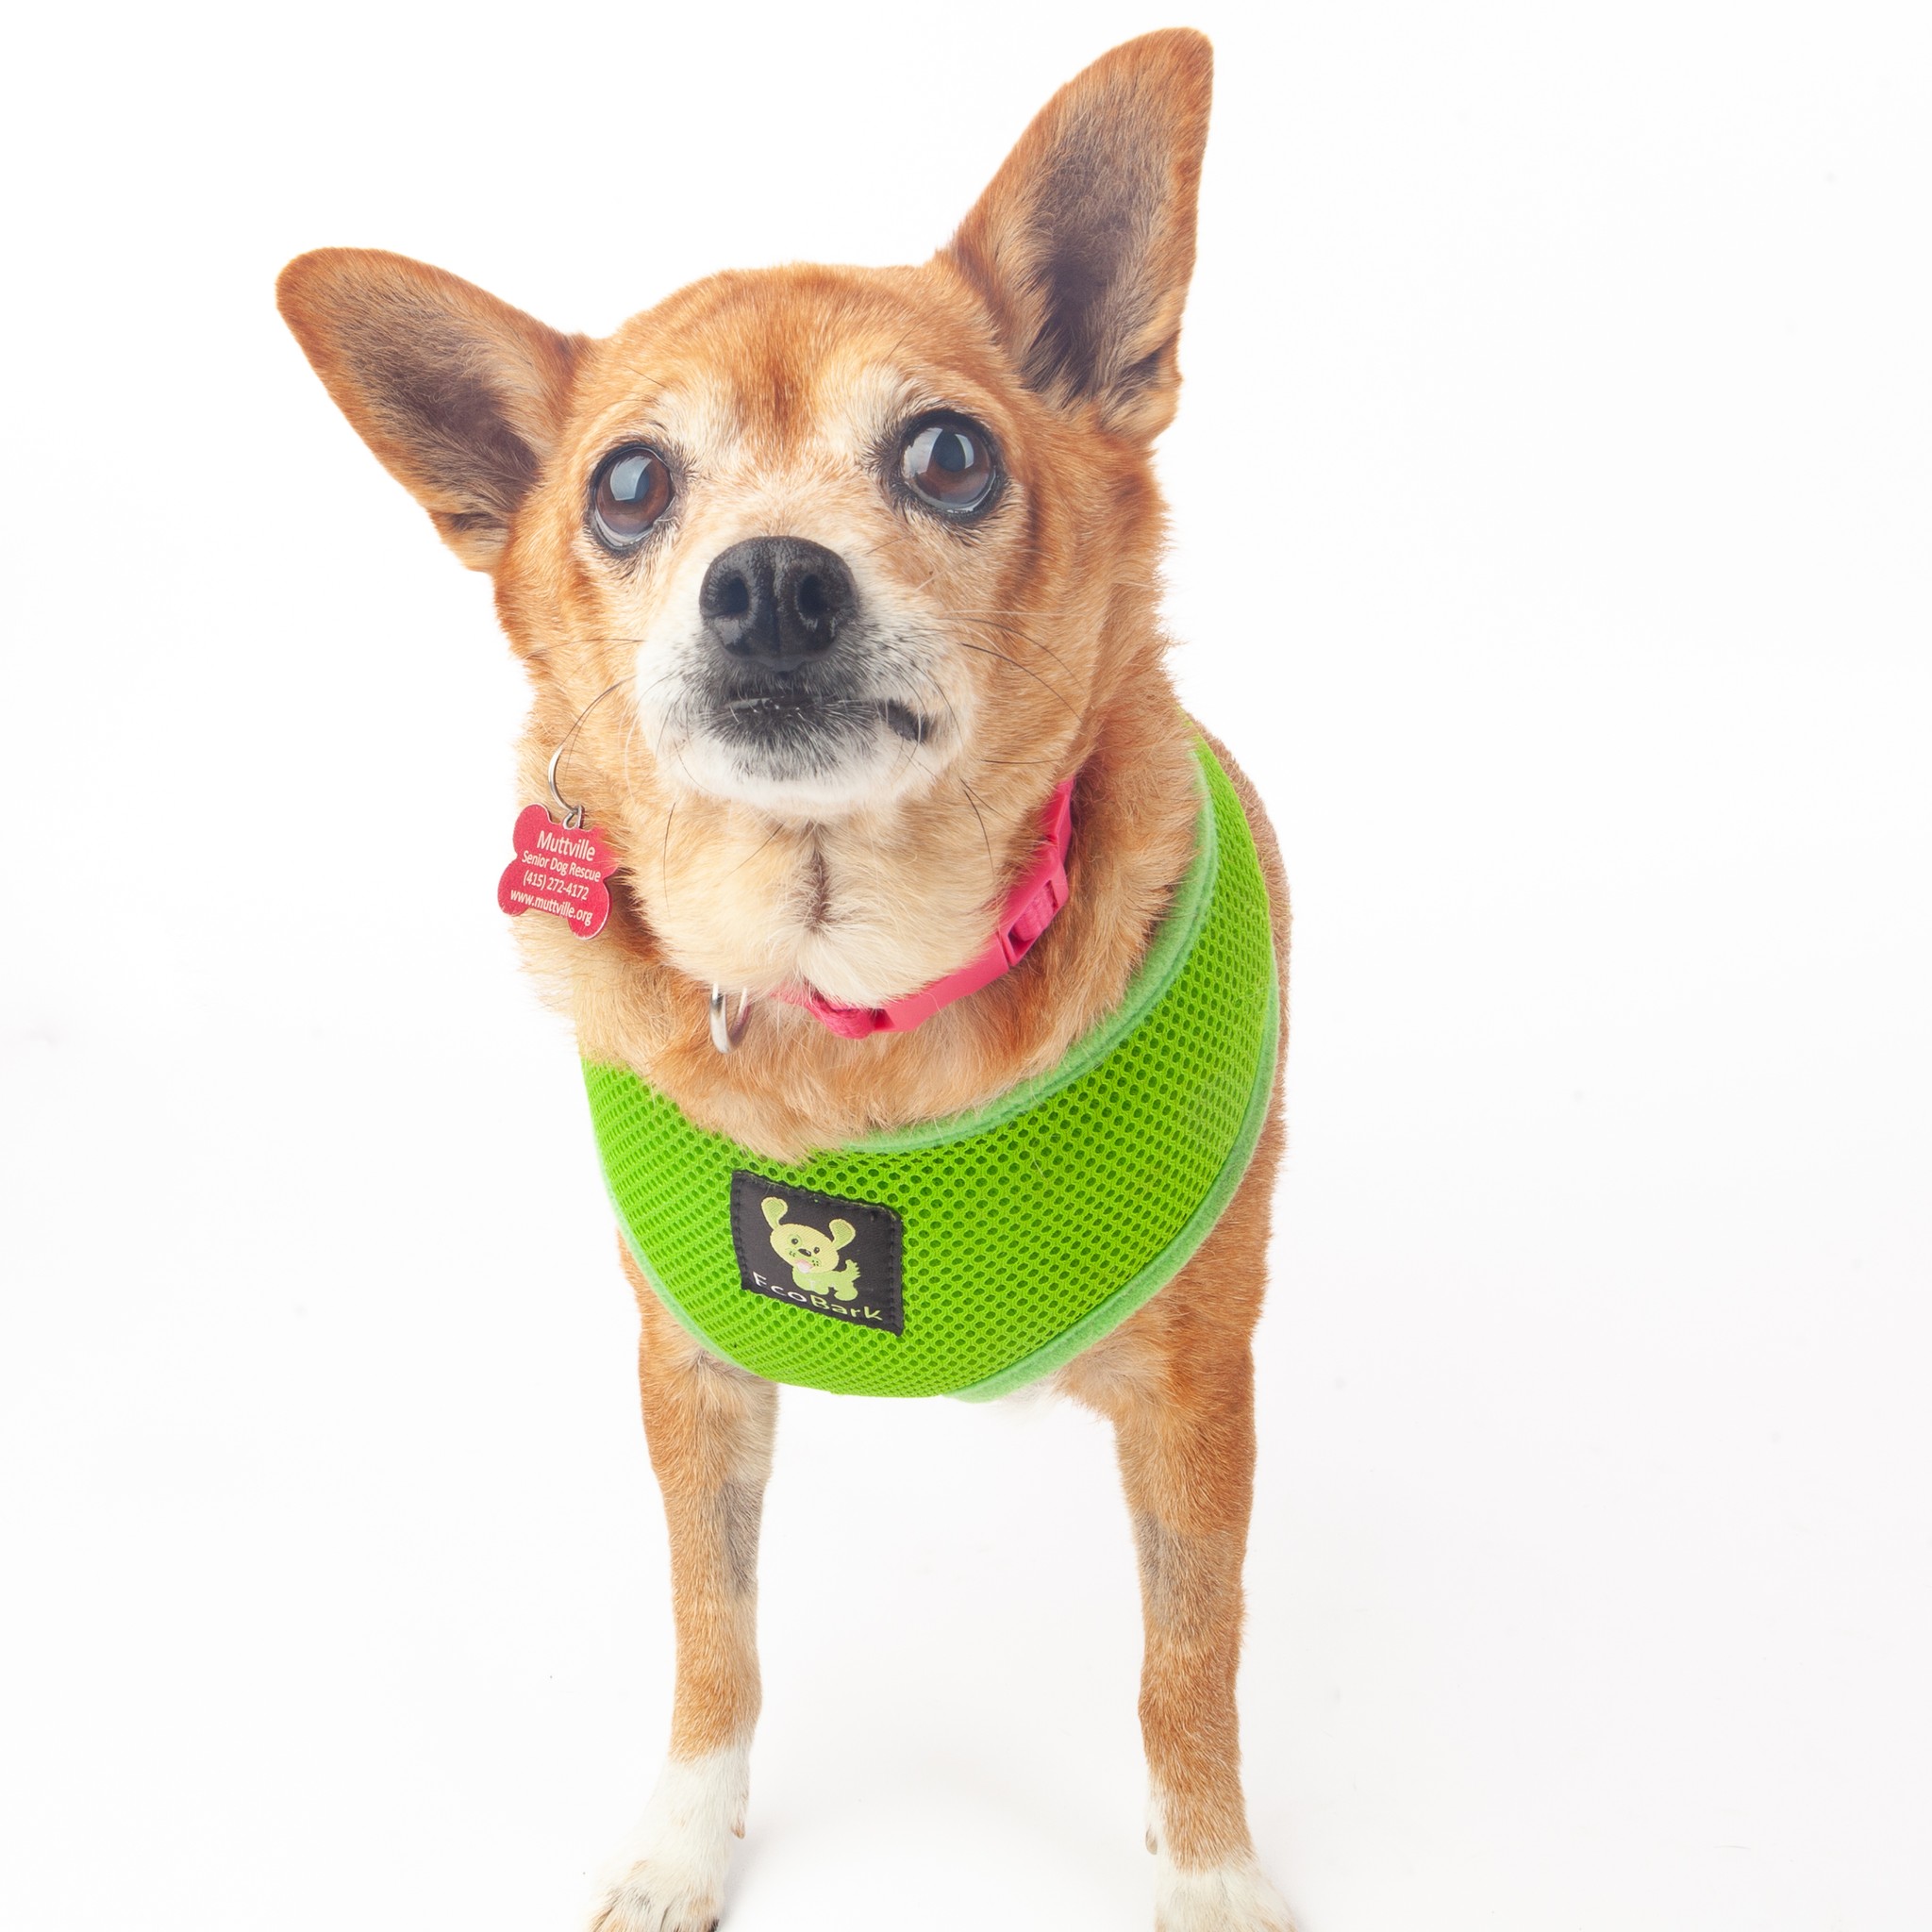 photo of a chihuahua wearing green harness